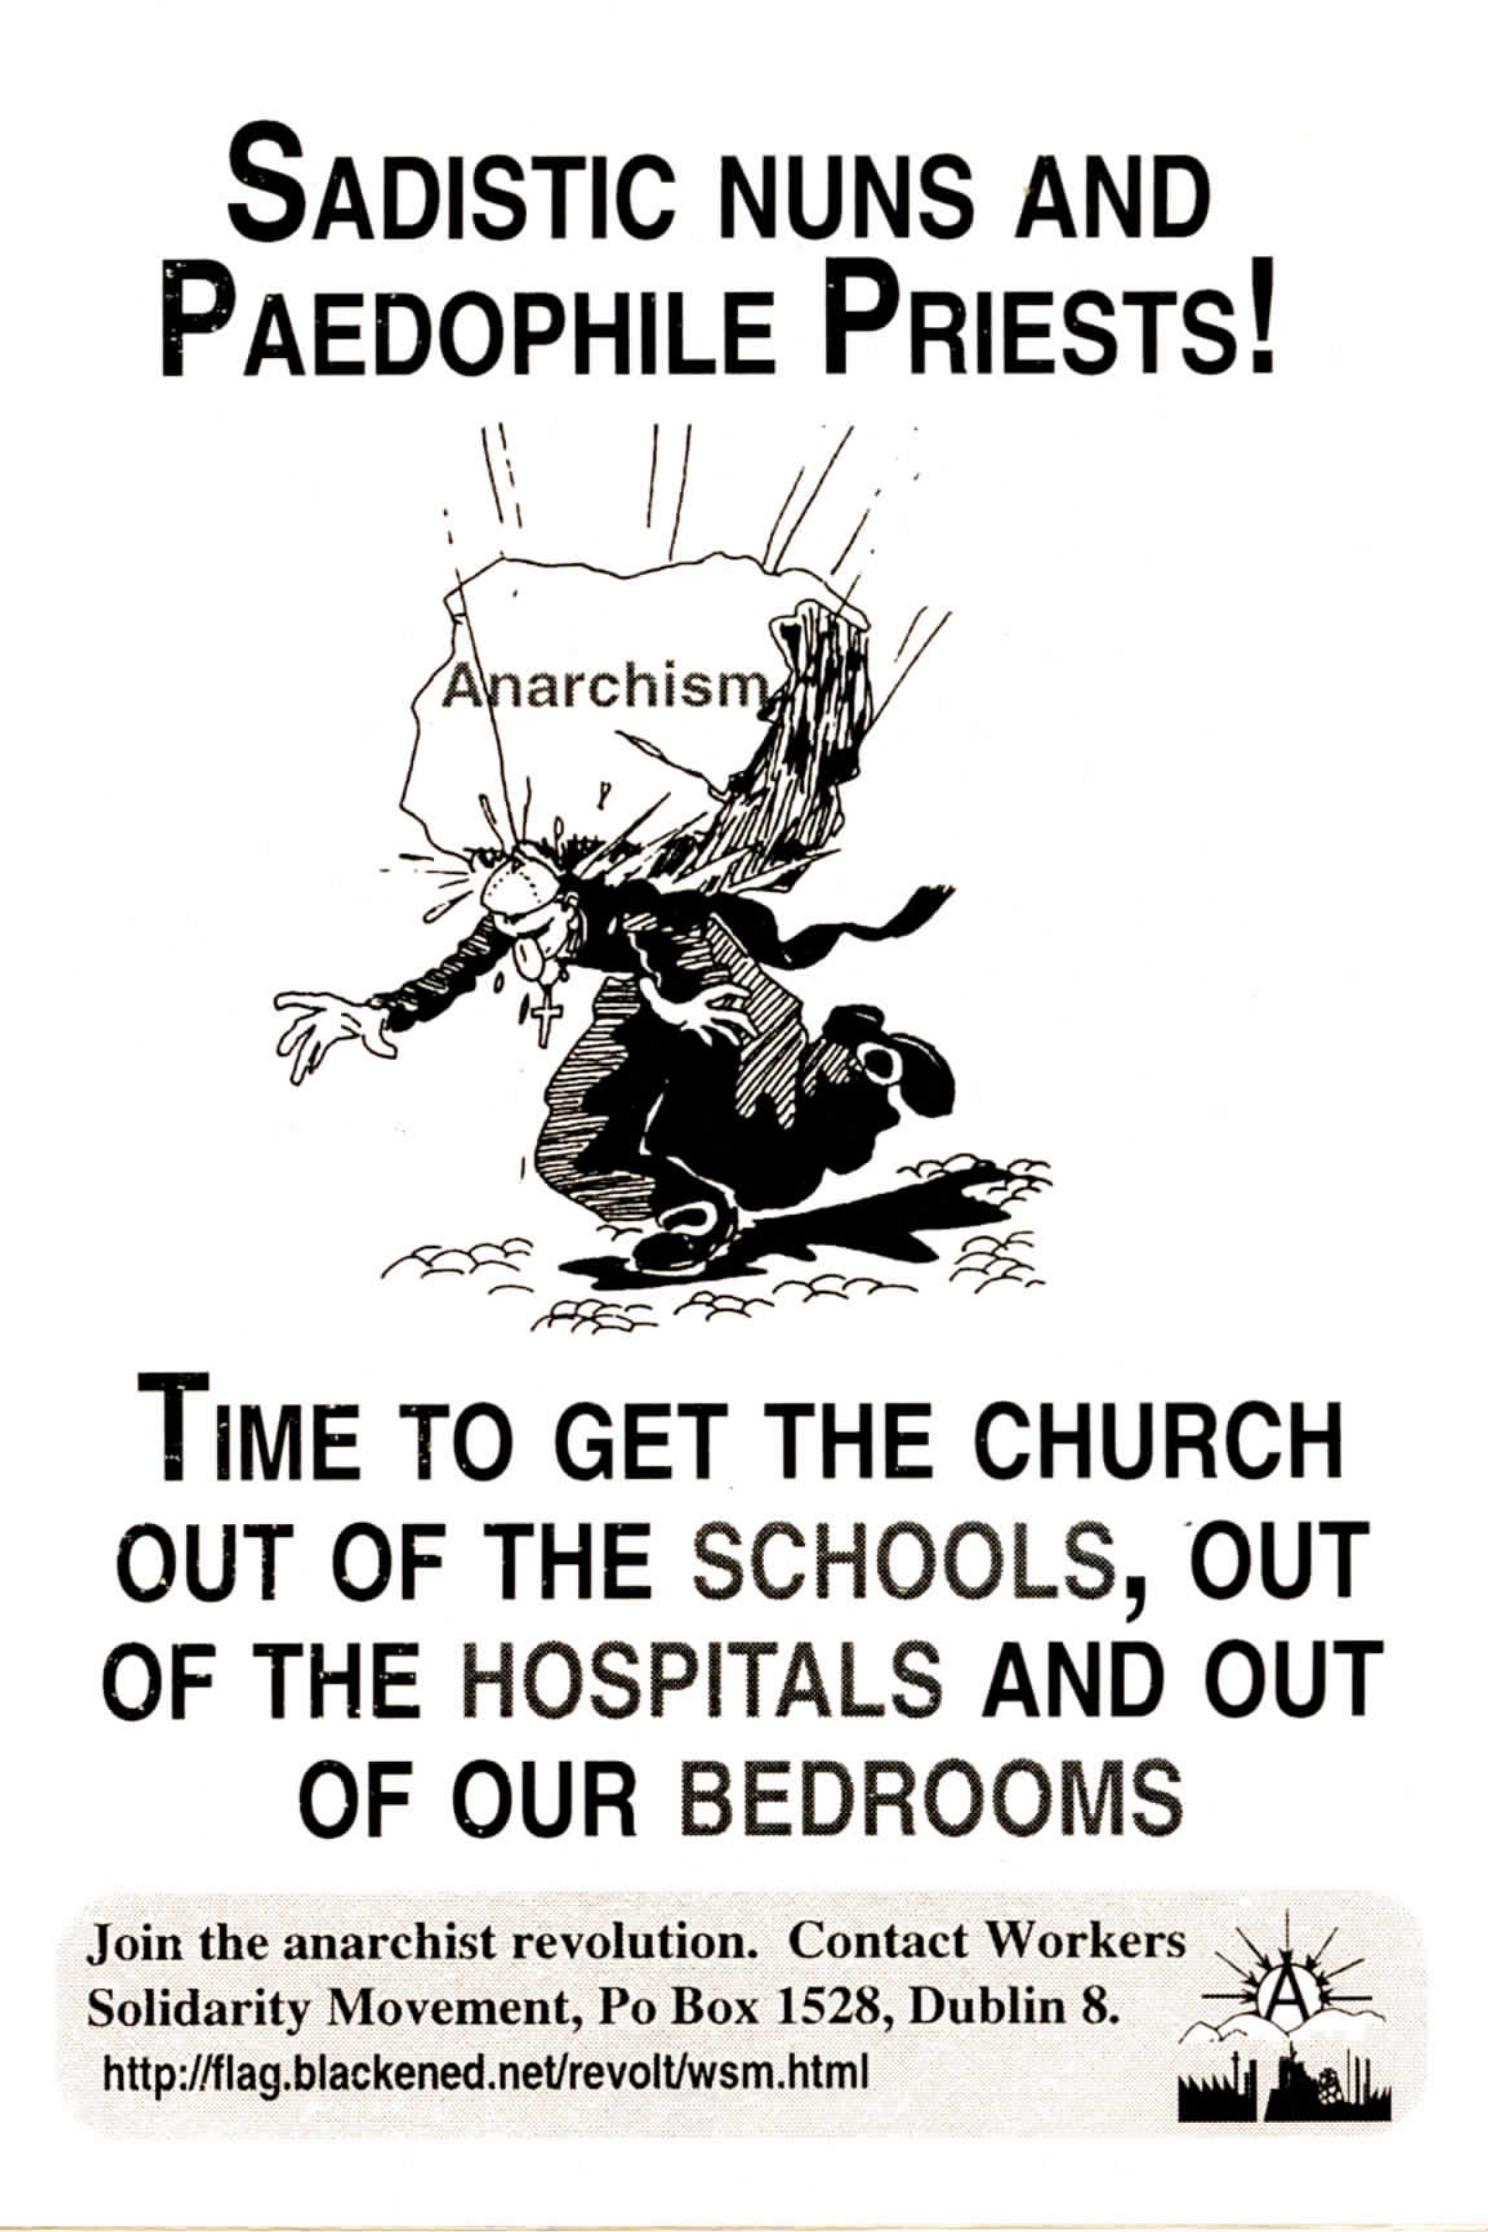 A sticker showing cartoon of a large rock labelled anarchism falling on a priest, with the text: Sadistic Nuns and Paedophile Priests! Time to get the church out of the schools, out of the hospitals and out of our bedrooms. The footer reads: Join the anarchist revolution. Contact Workers Solidarity Movement.